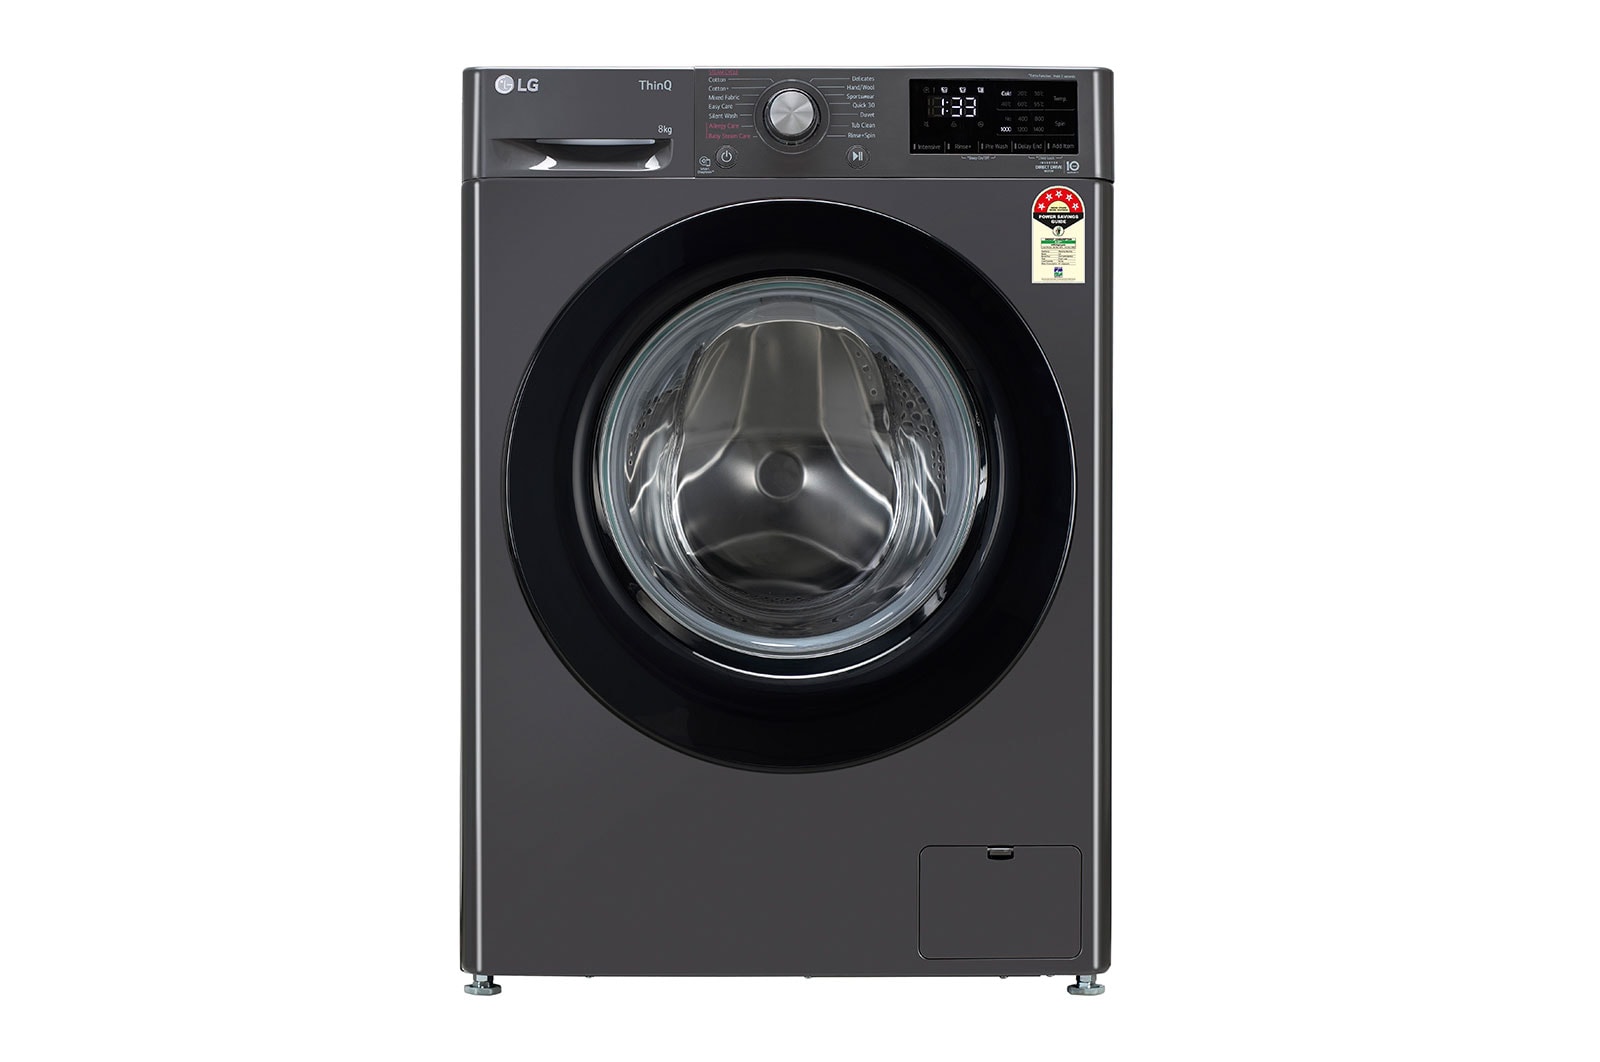 LG 8Kg Front Load Washing Machine, AI Direct Drive™, Middle Black, FHP1208Z3M